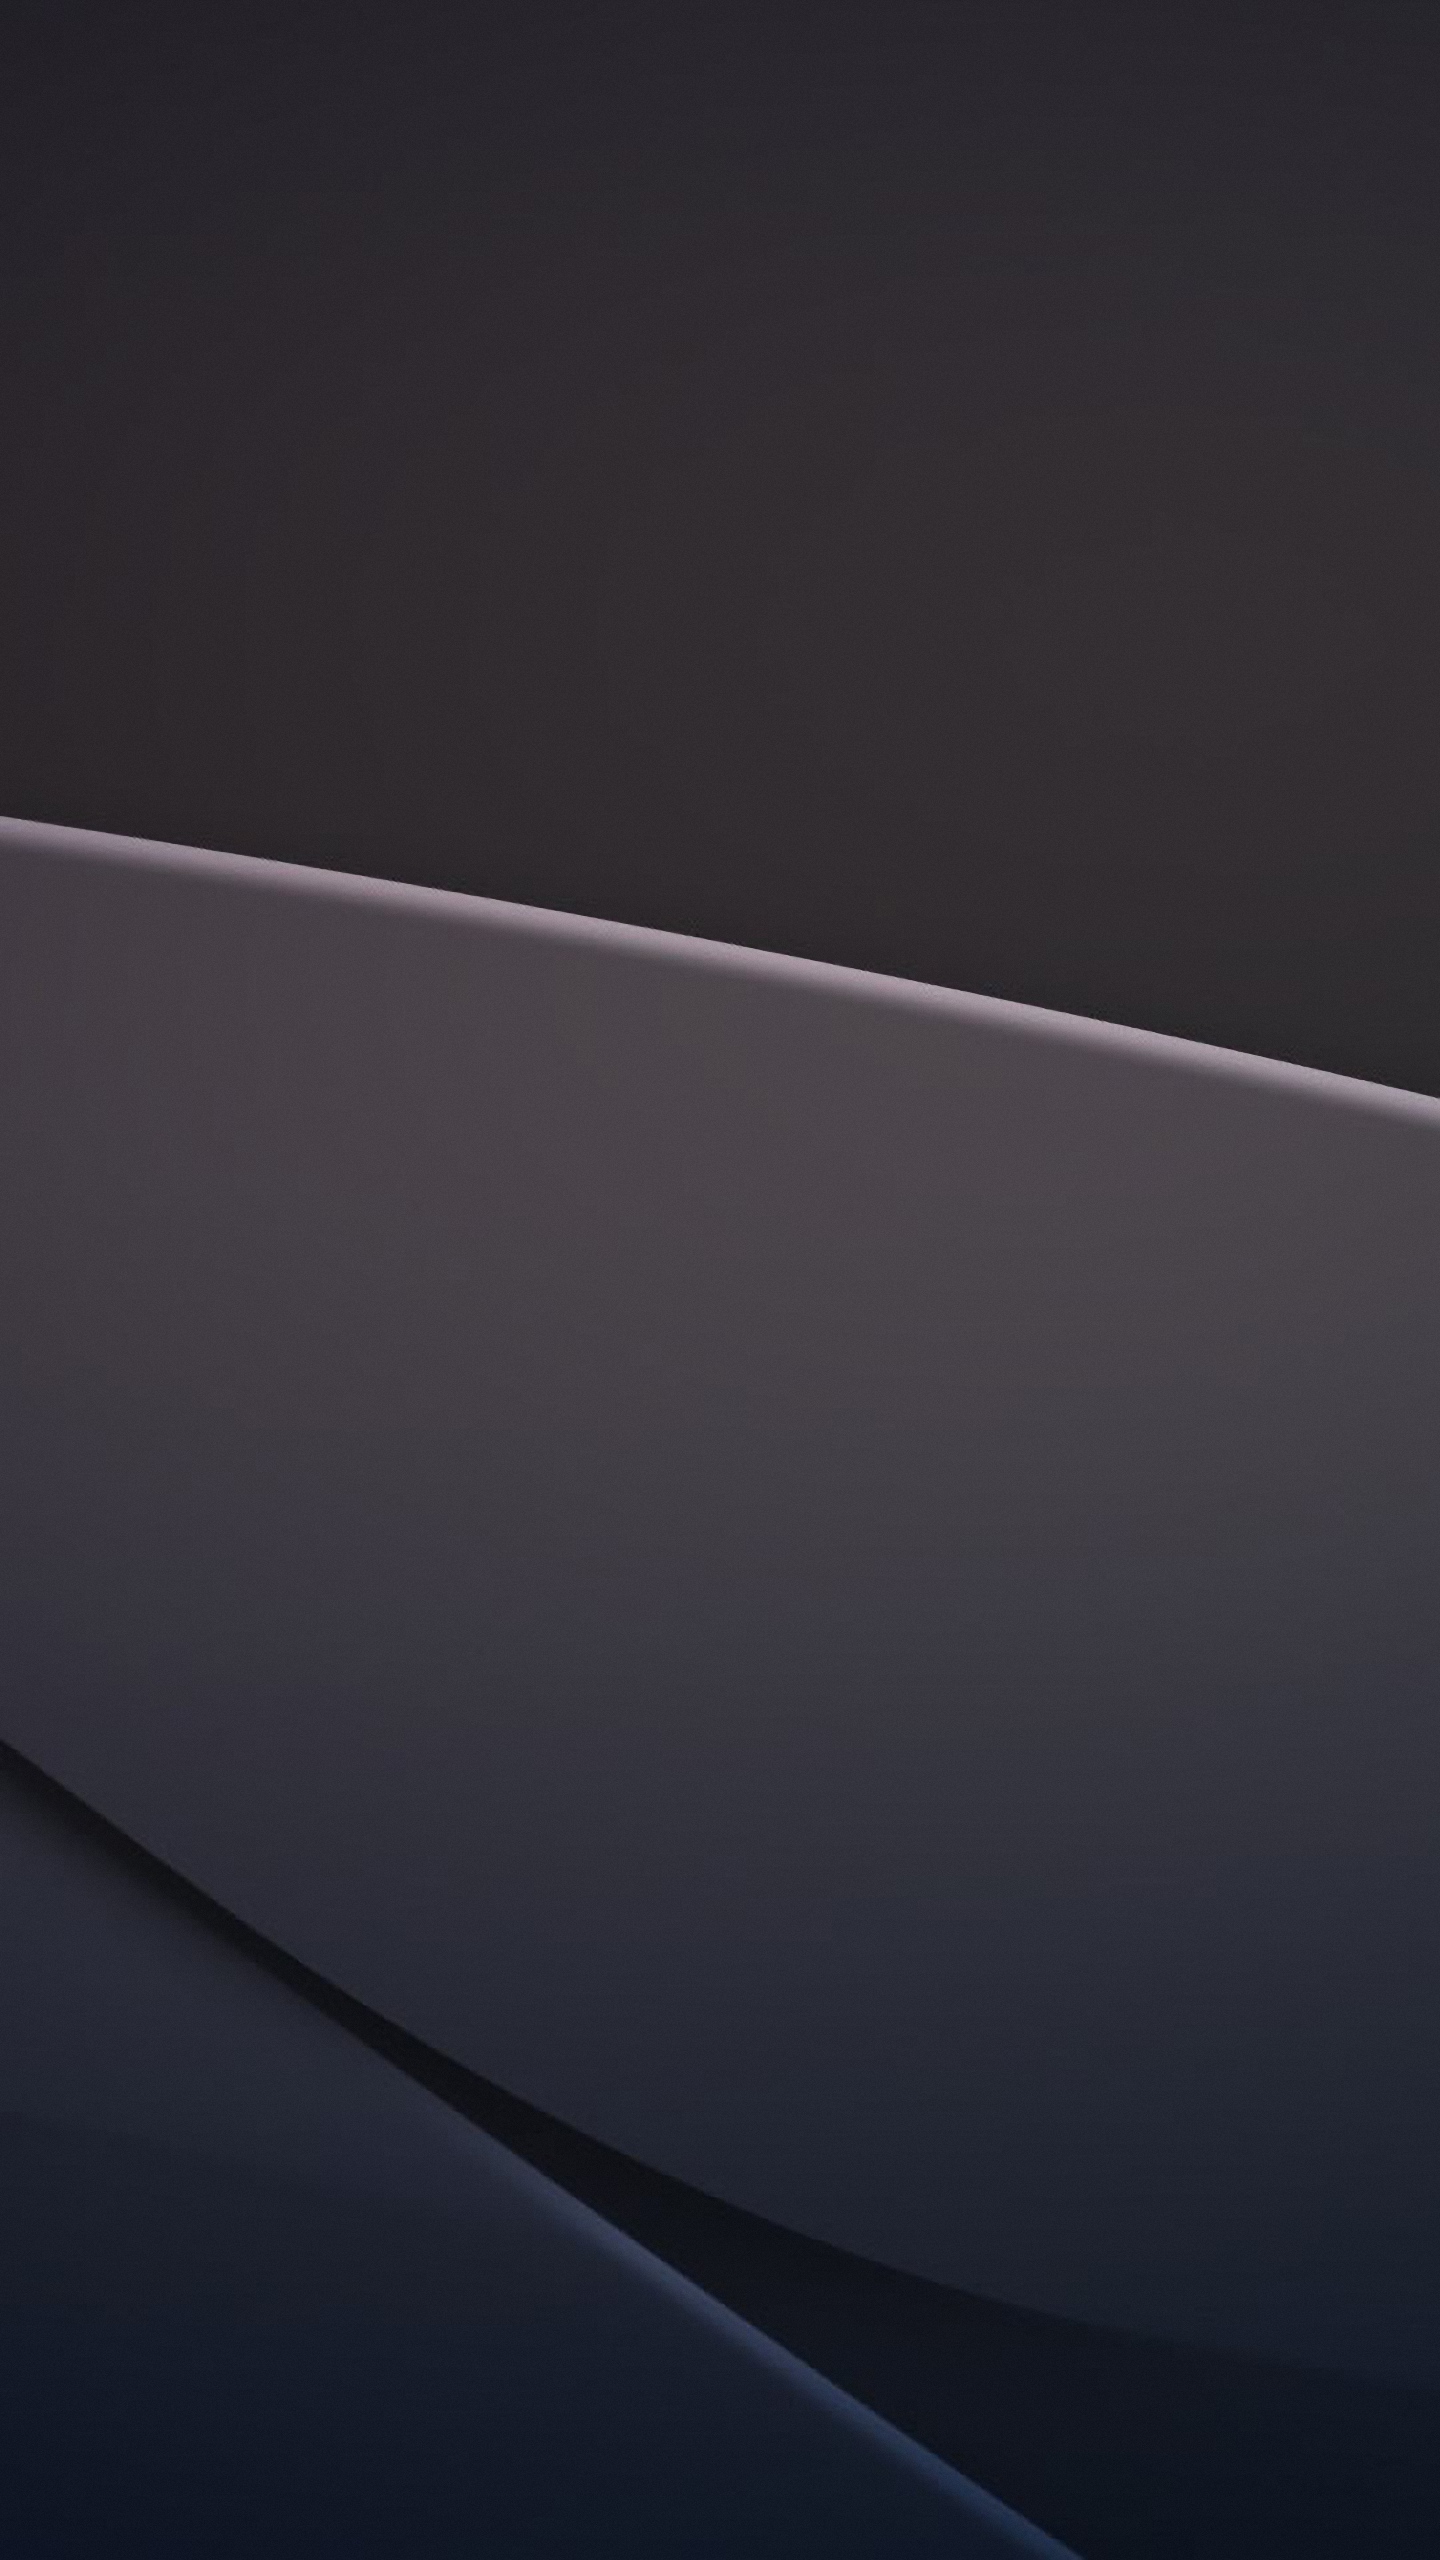 Metallic Curves Wallpaper For Lg G3 Back To